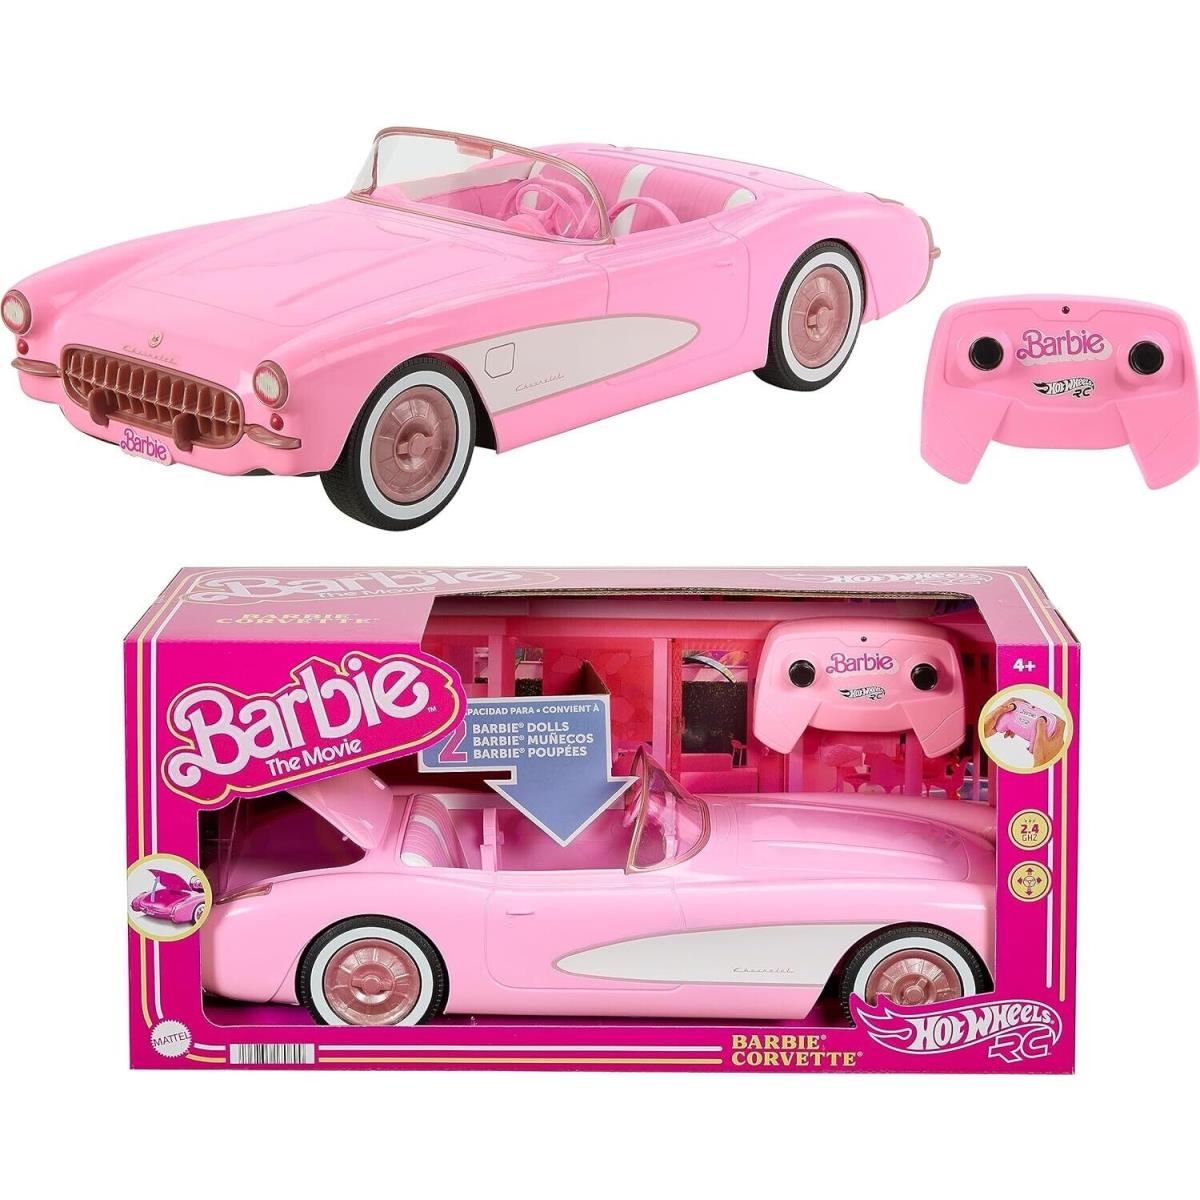 Hot Wheels RC Barbie 1956 Corvette Toy Car From Barbie The Movie - Pink